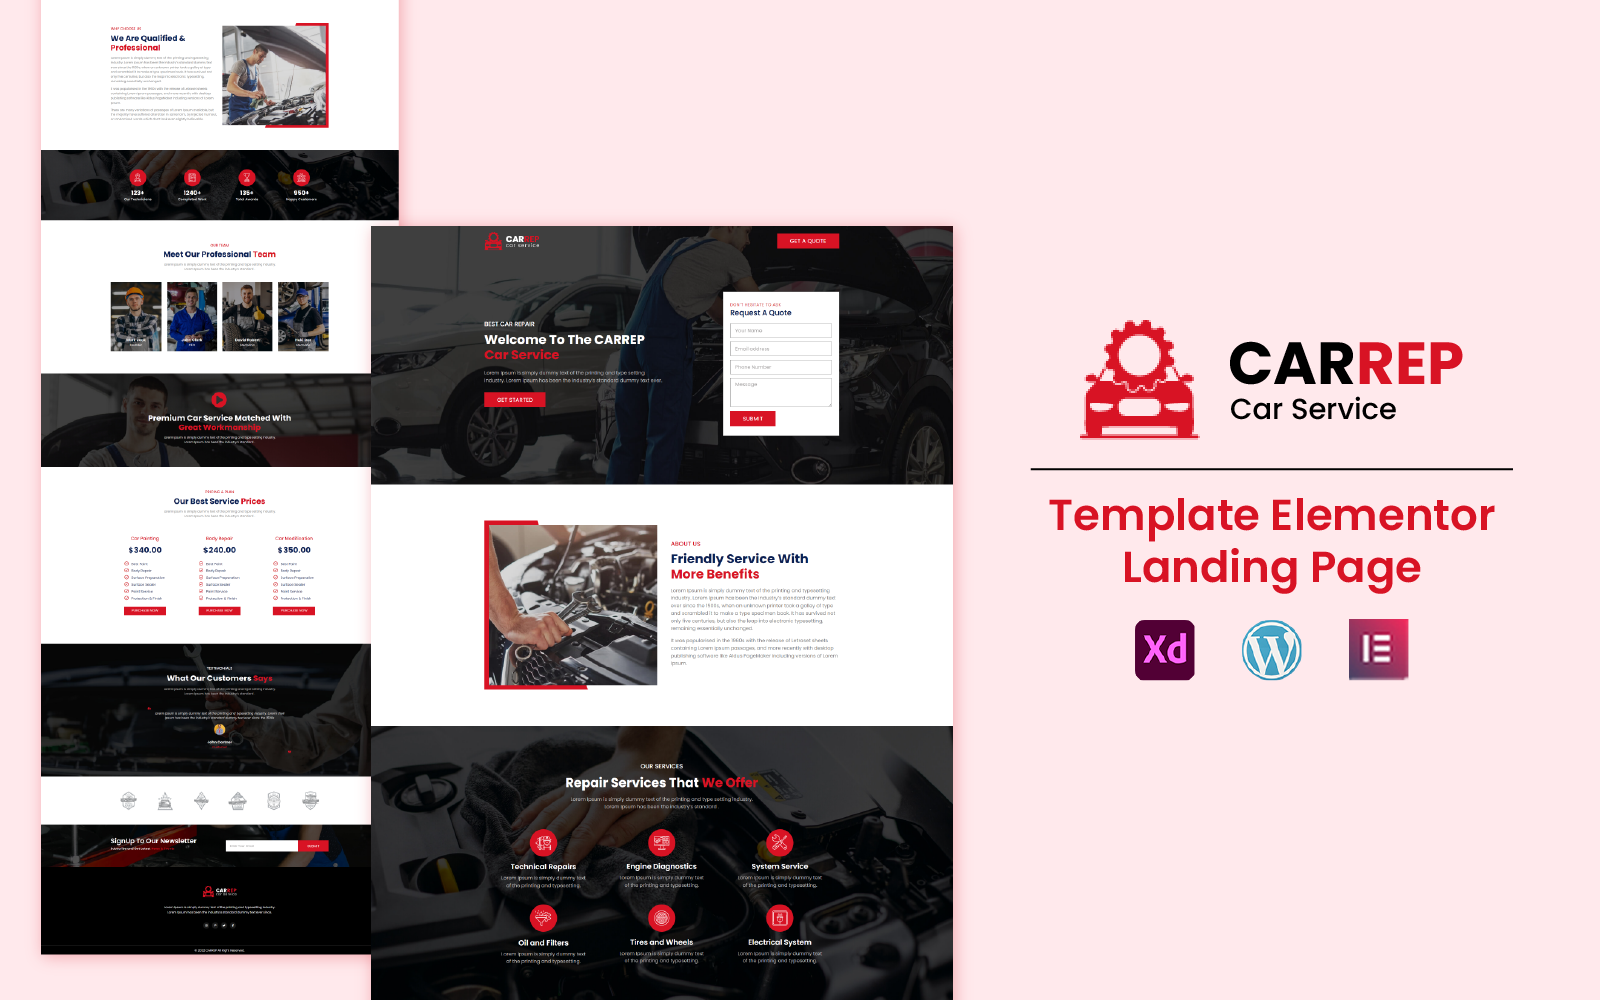 Carrep - Car Services Ready to Use Elementor Landing Page Template